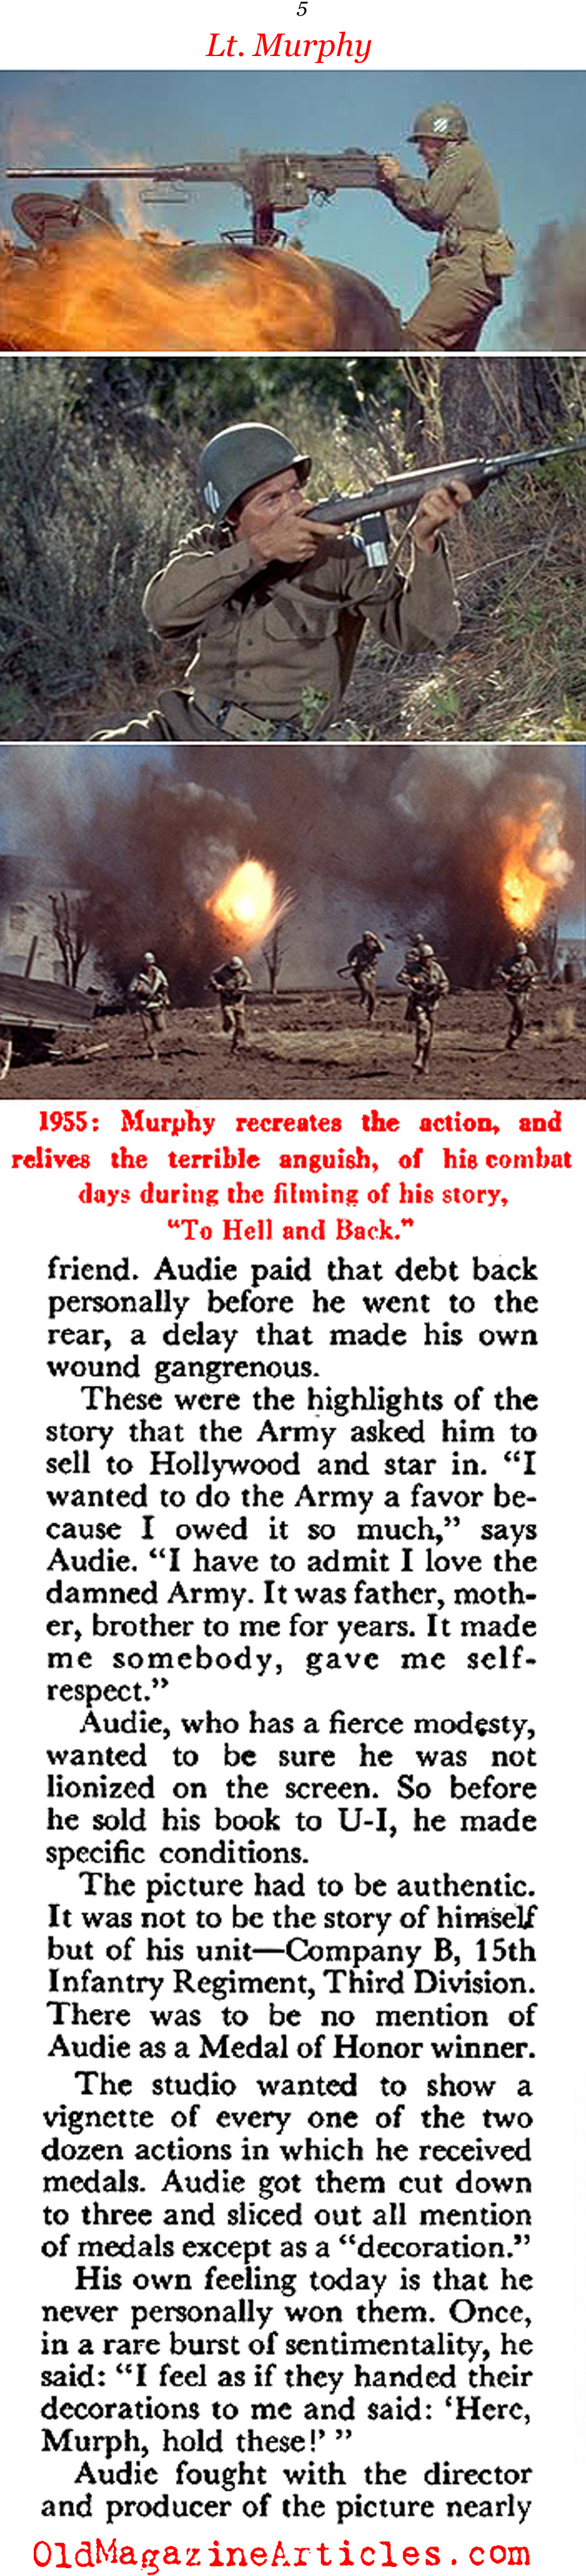 Audie Murphy: the Most Decorated  (Coronet Magazine, 1955)